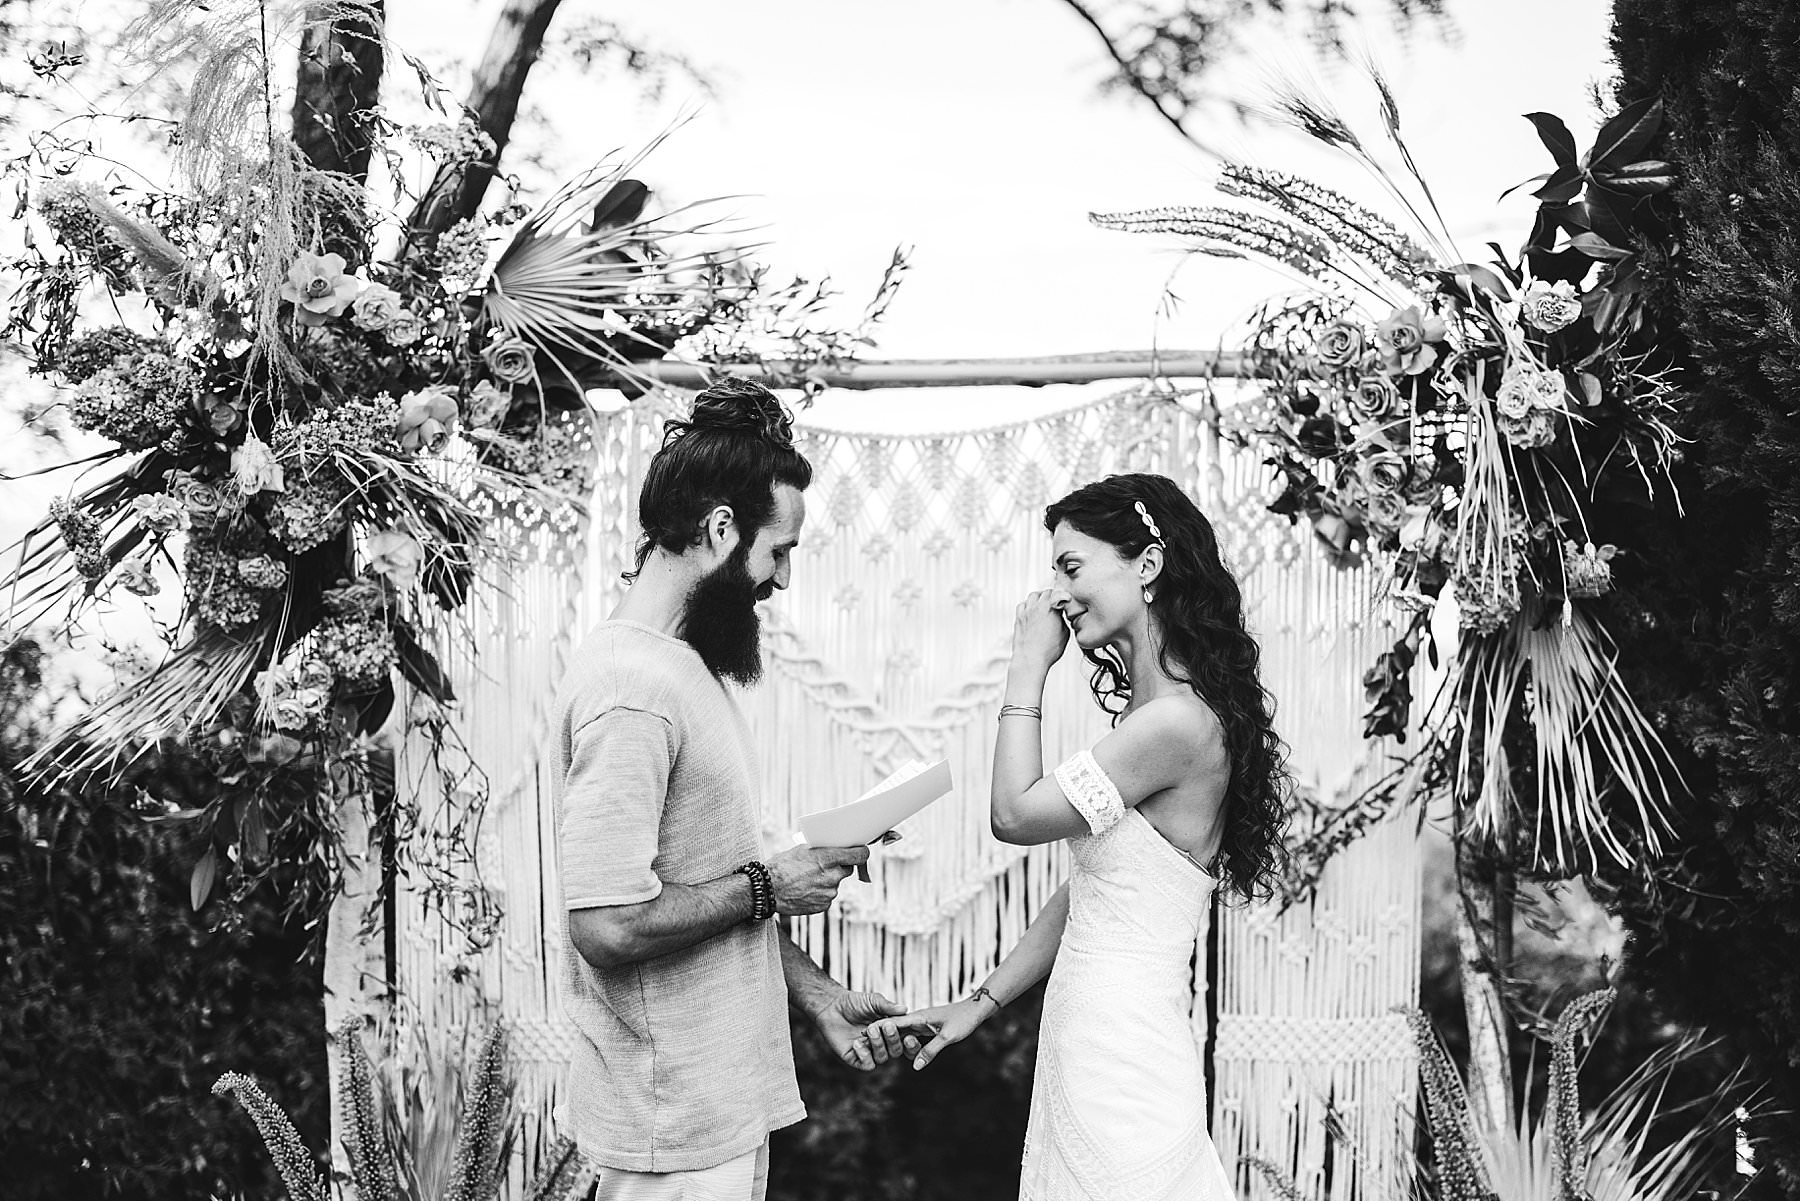 Emotional photos of bohemian chic and rock wedding at La Valle farmhouse in the heart of Tuscany near Montaione